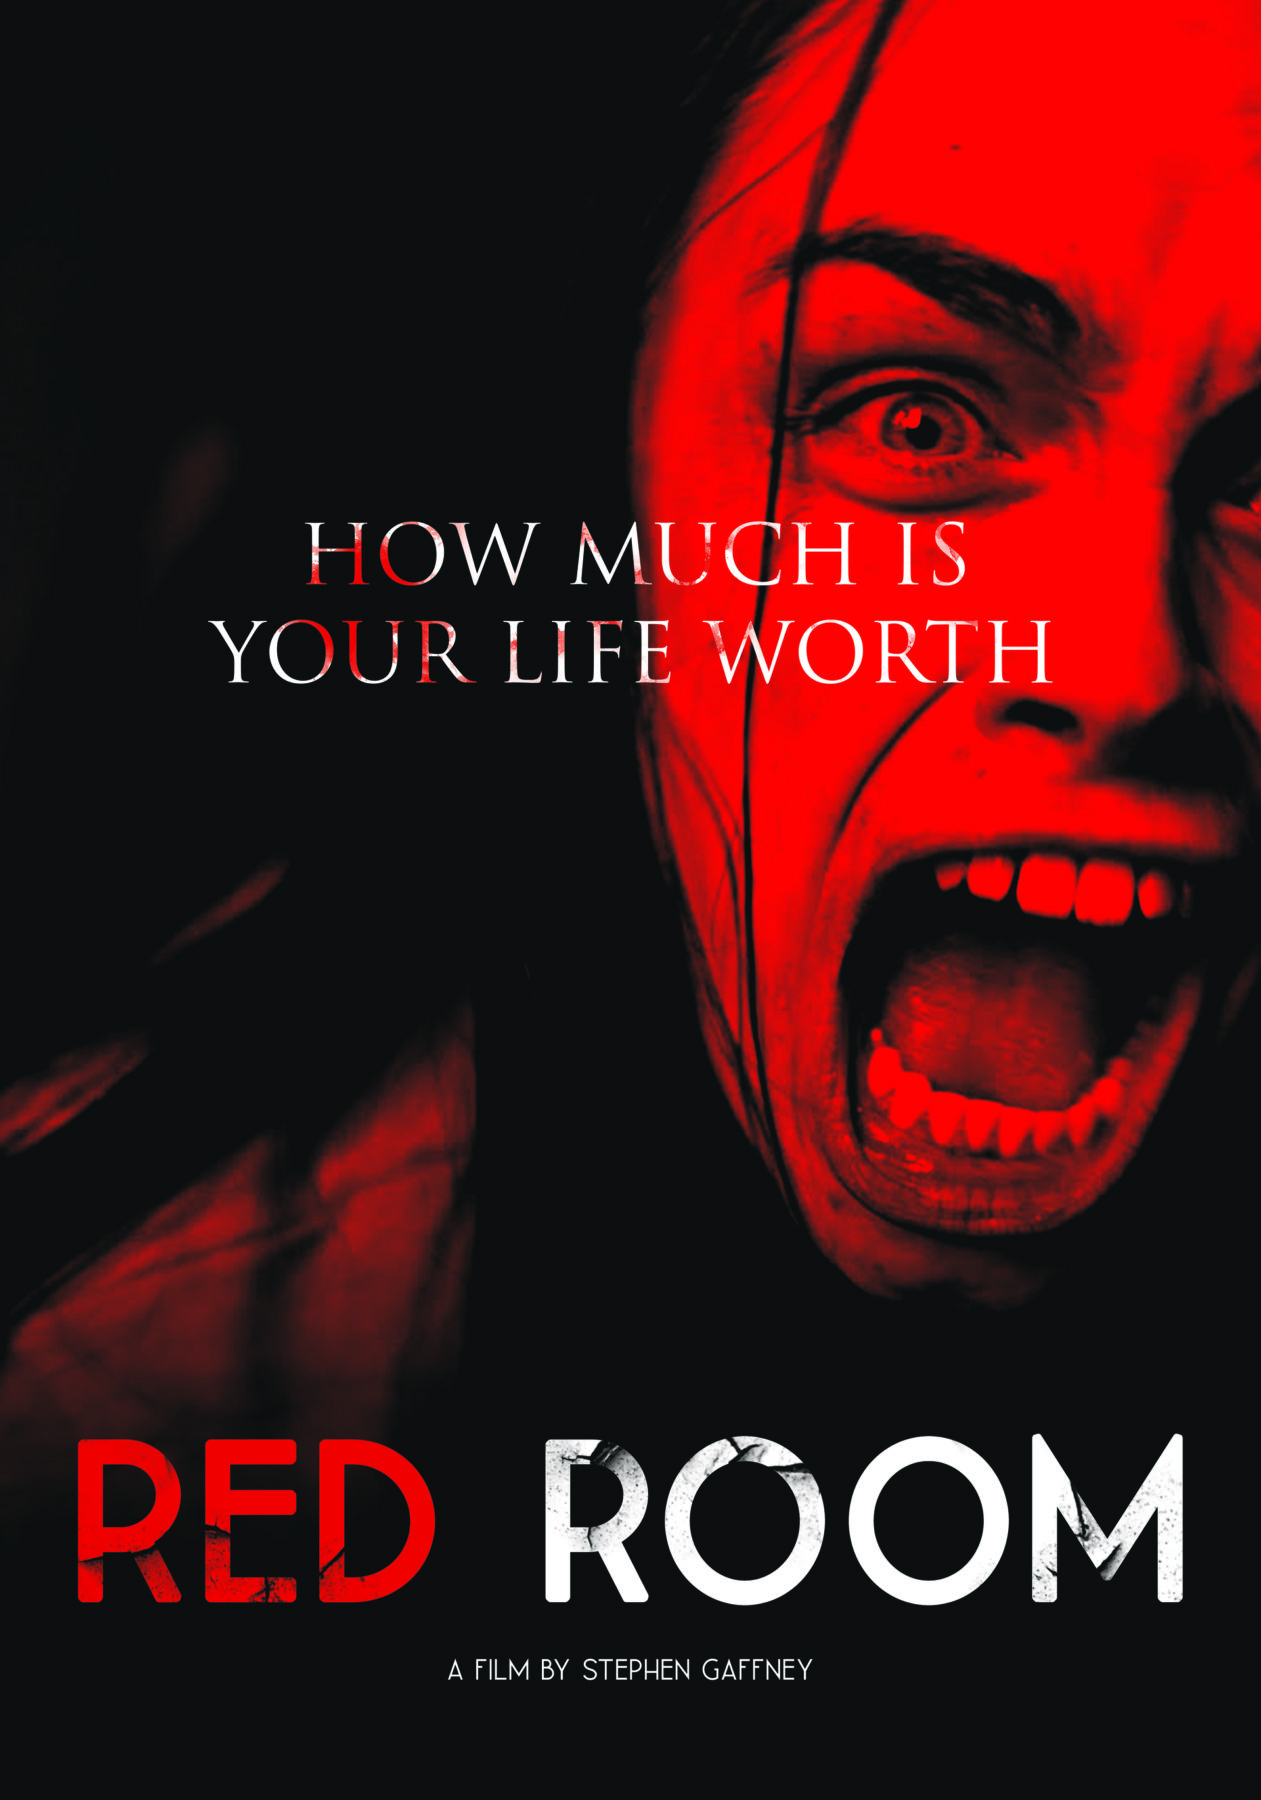 38 Top Images Red Room Movie Review : 37 Examples of Color Psychology on Room Interiors ...